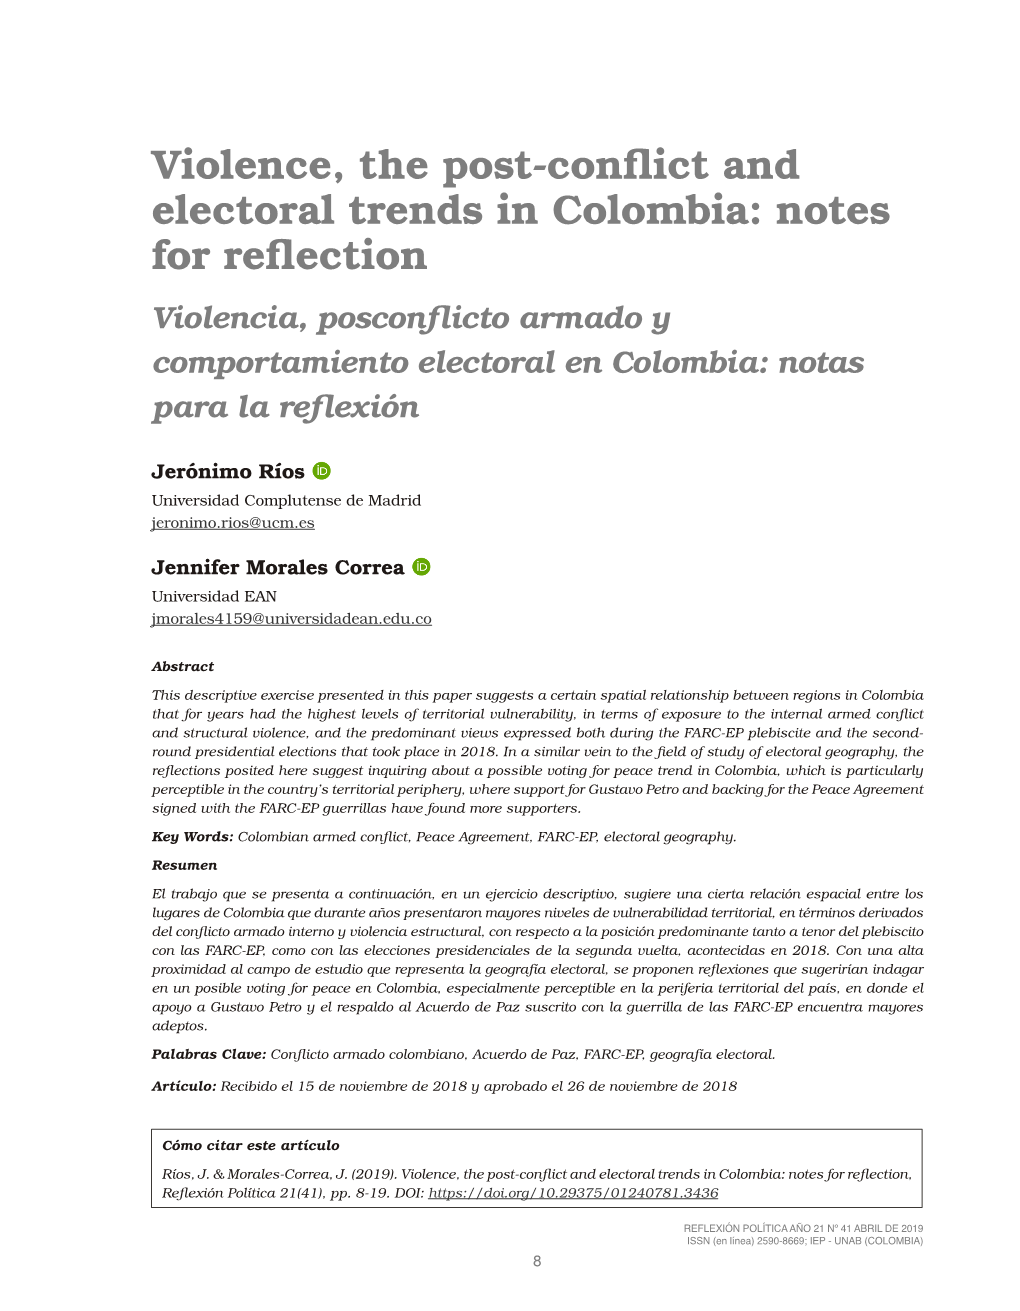 Violence, the Post-Conflict and Electoral Trends in Colombia